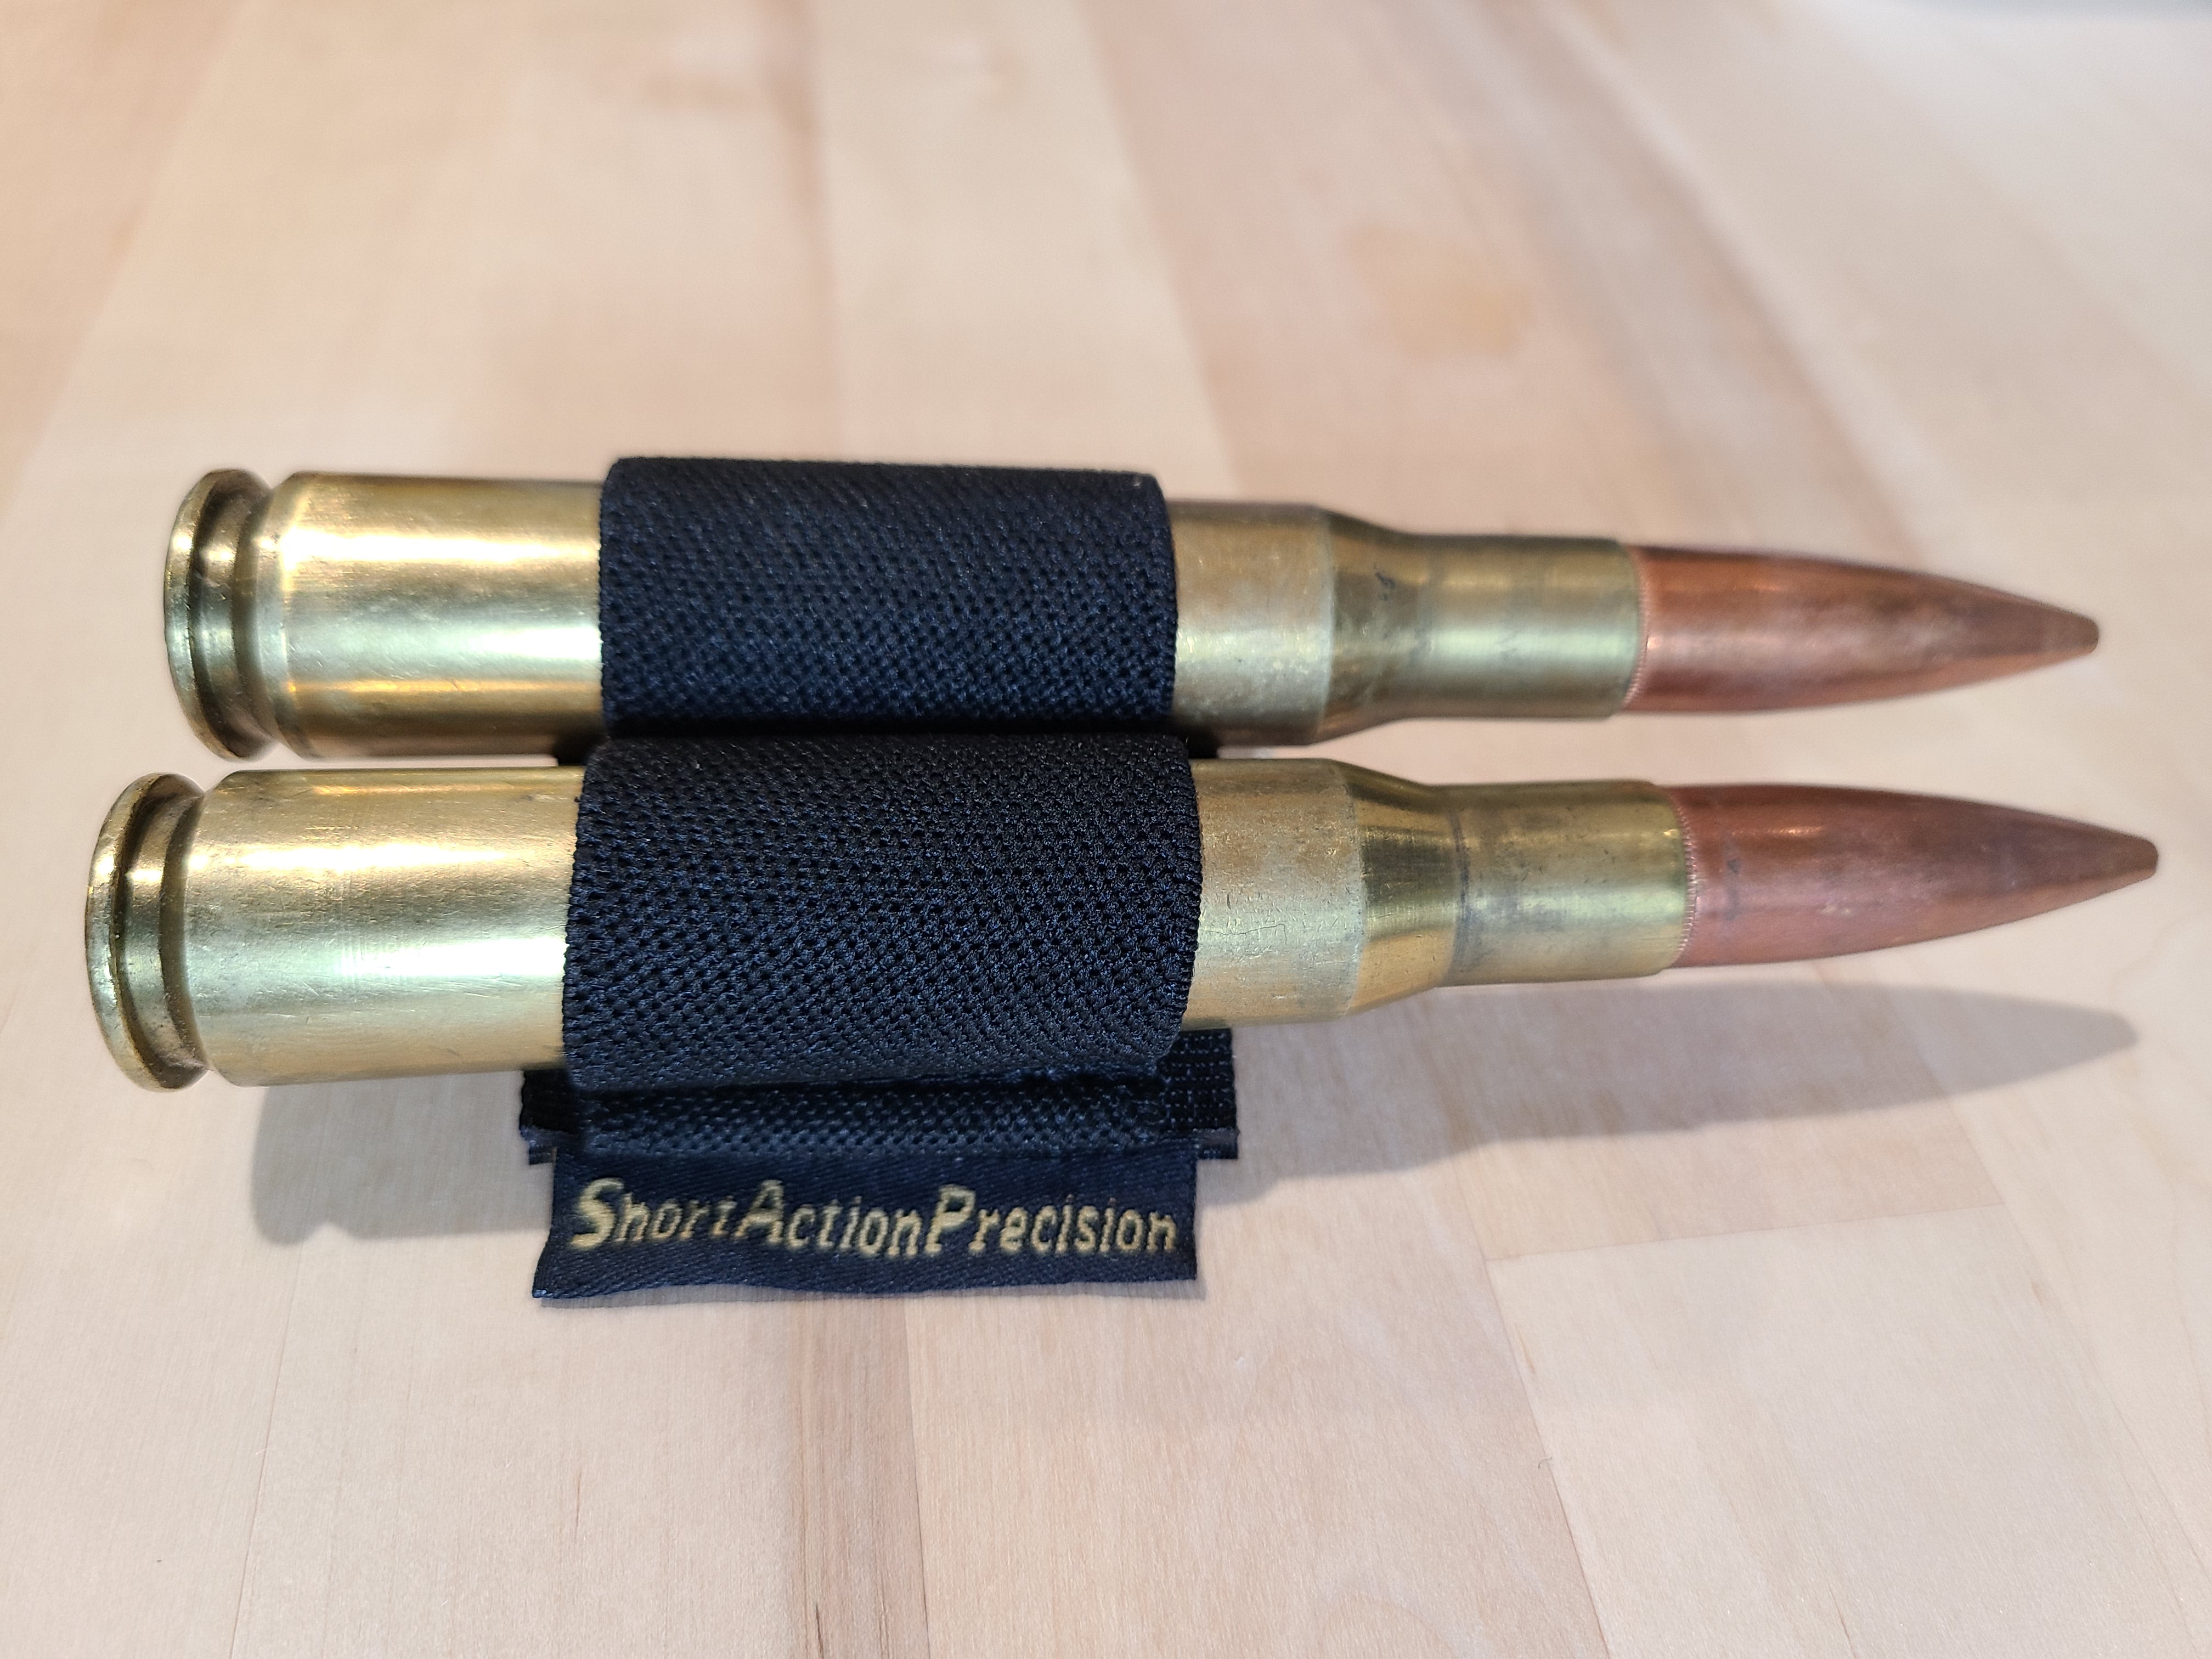 50 BMG Two Round Holder – Short Action Precision